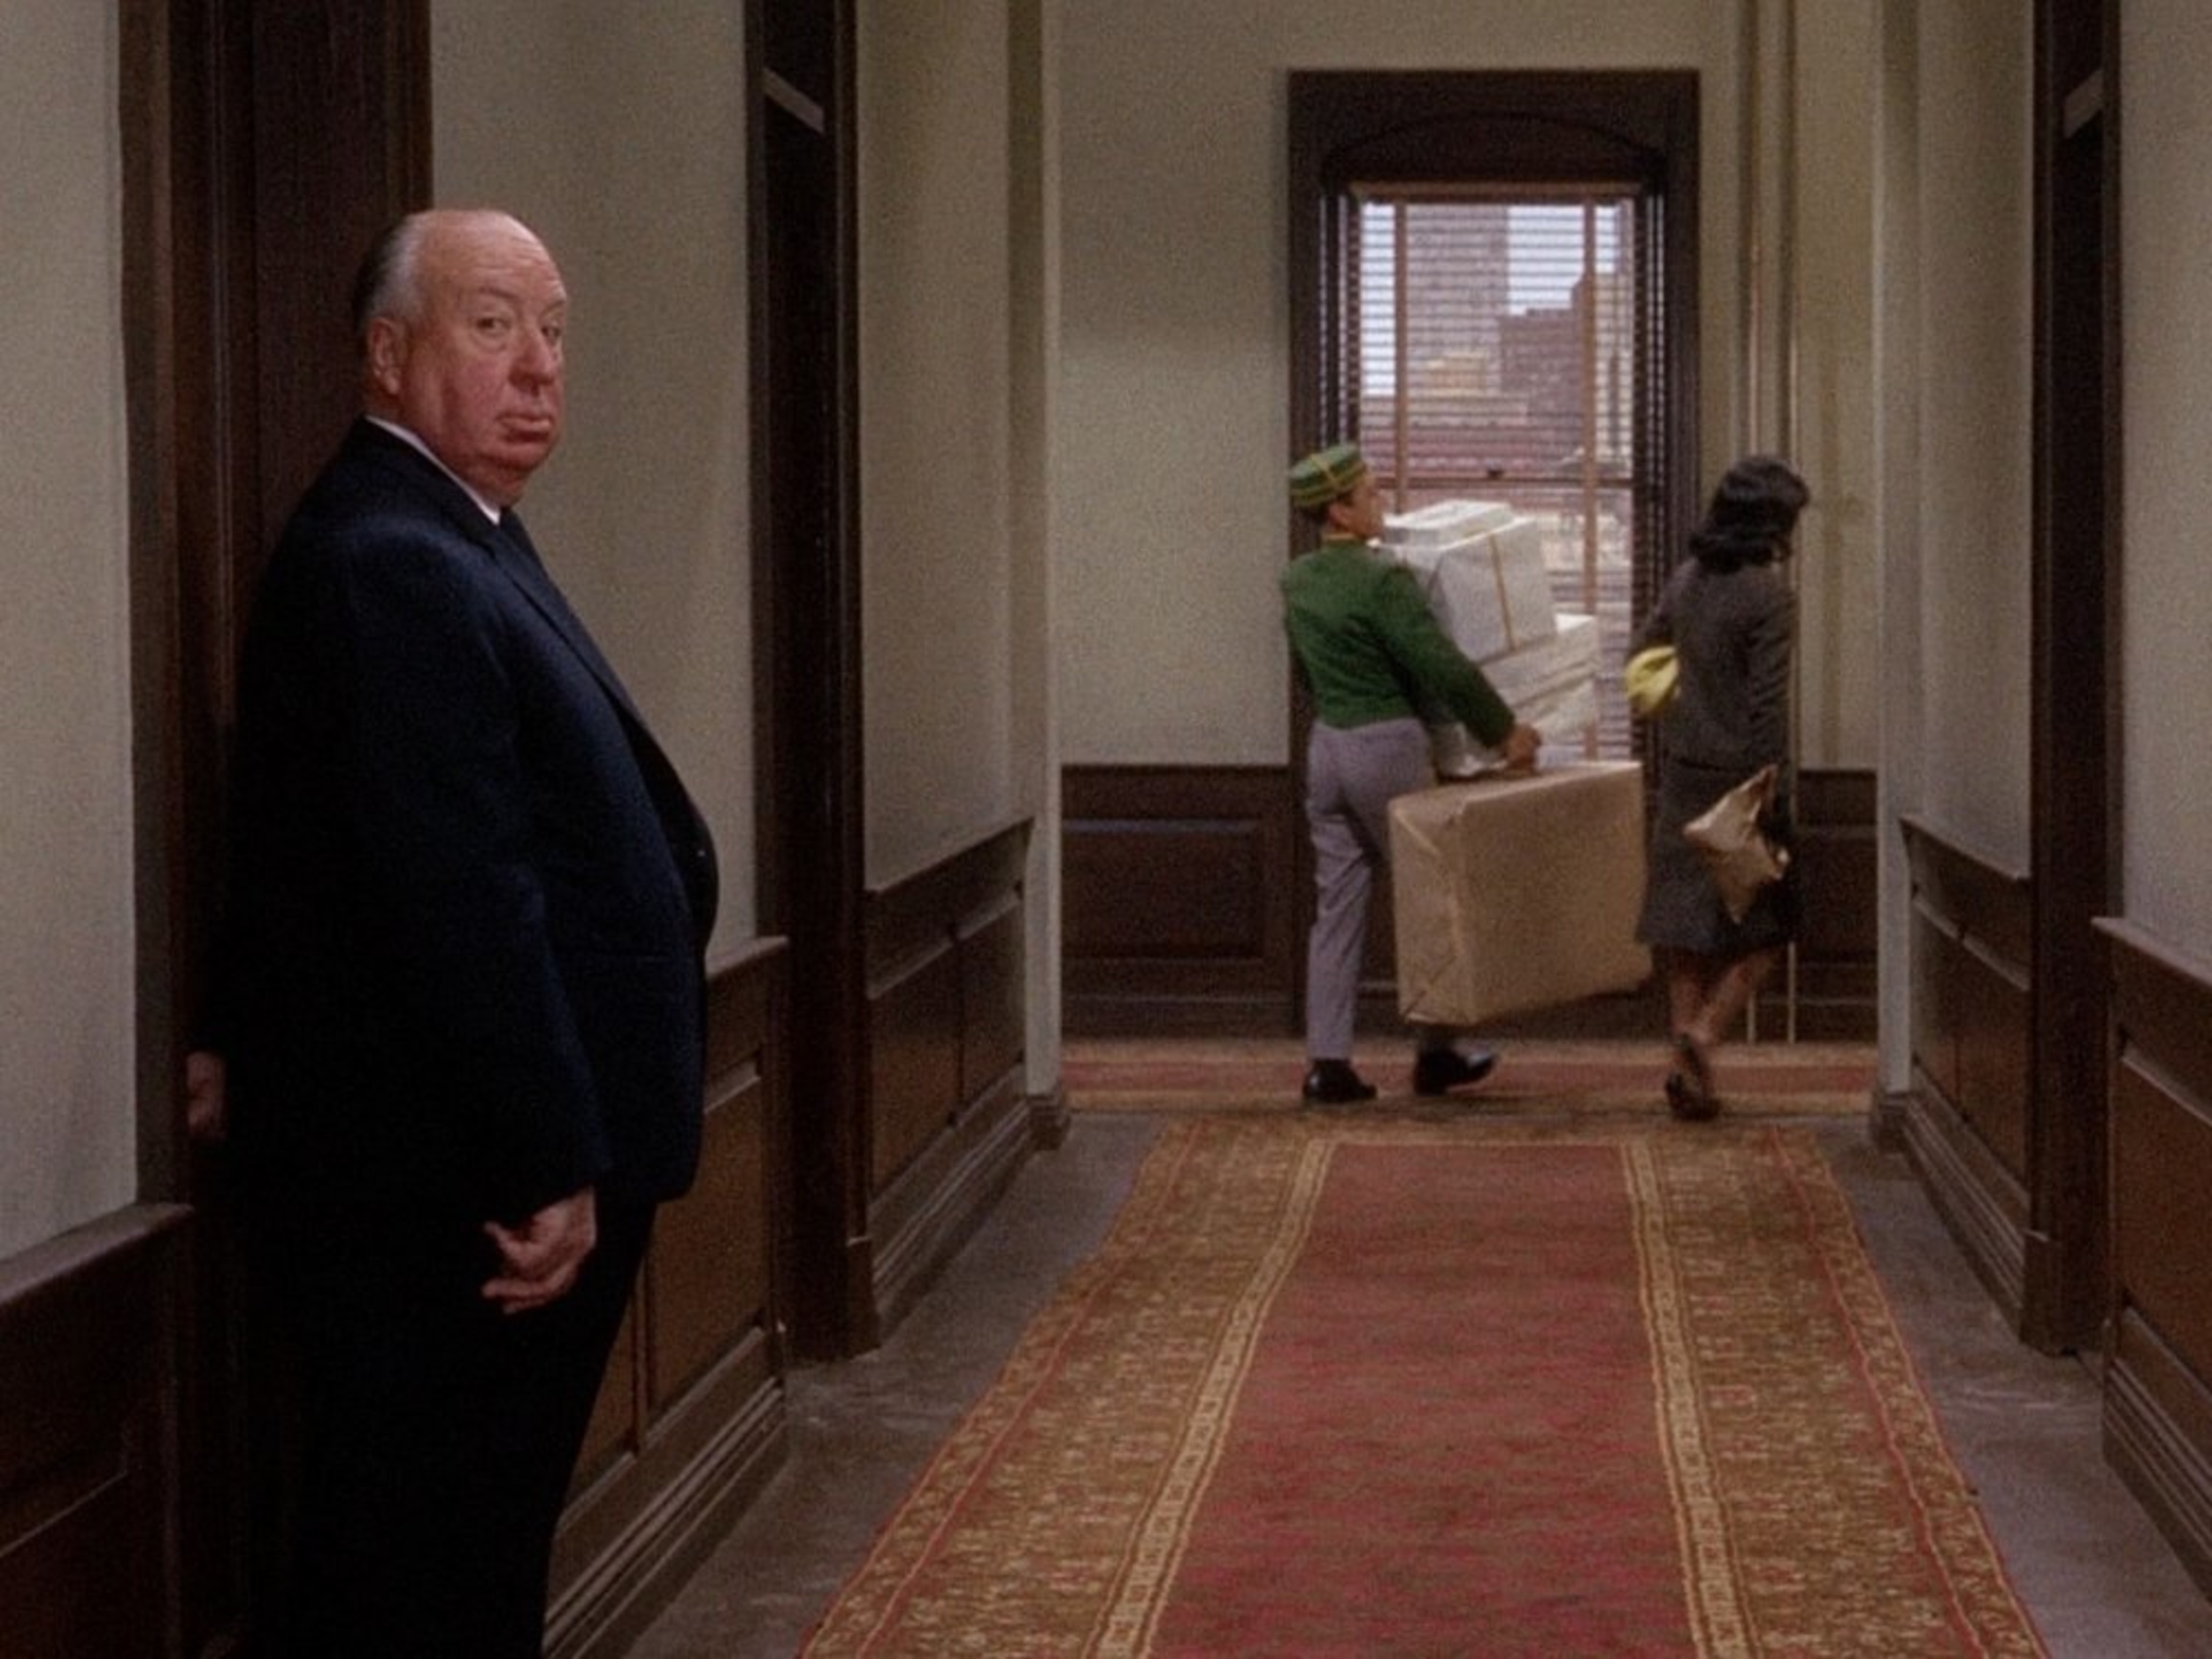 <p>OK, so Hitchcock was feeling himself here. The cameo officially went meta. In a hotel, the director enters from the left of the screen and then straight-up looks at the camera like he’s Jim Halpert. It’s a bit much, but the guy was a legend by this point. Who was going to stop him?</p>